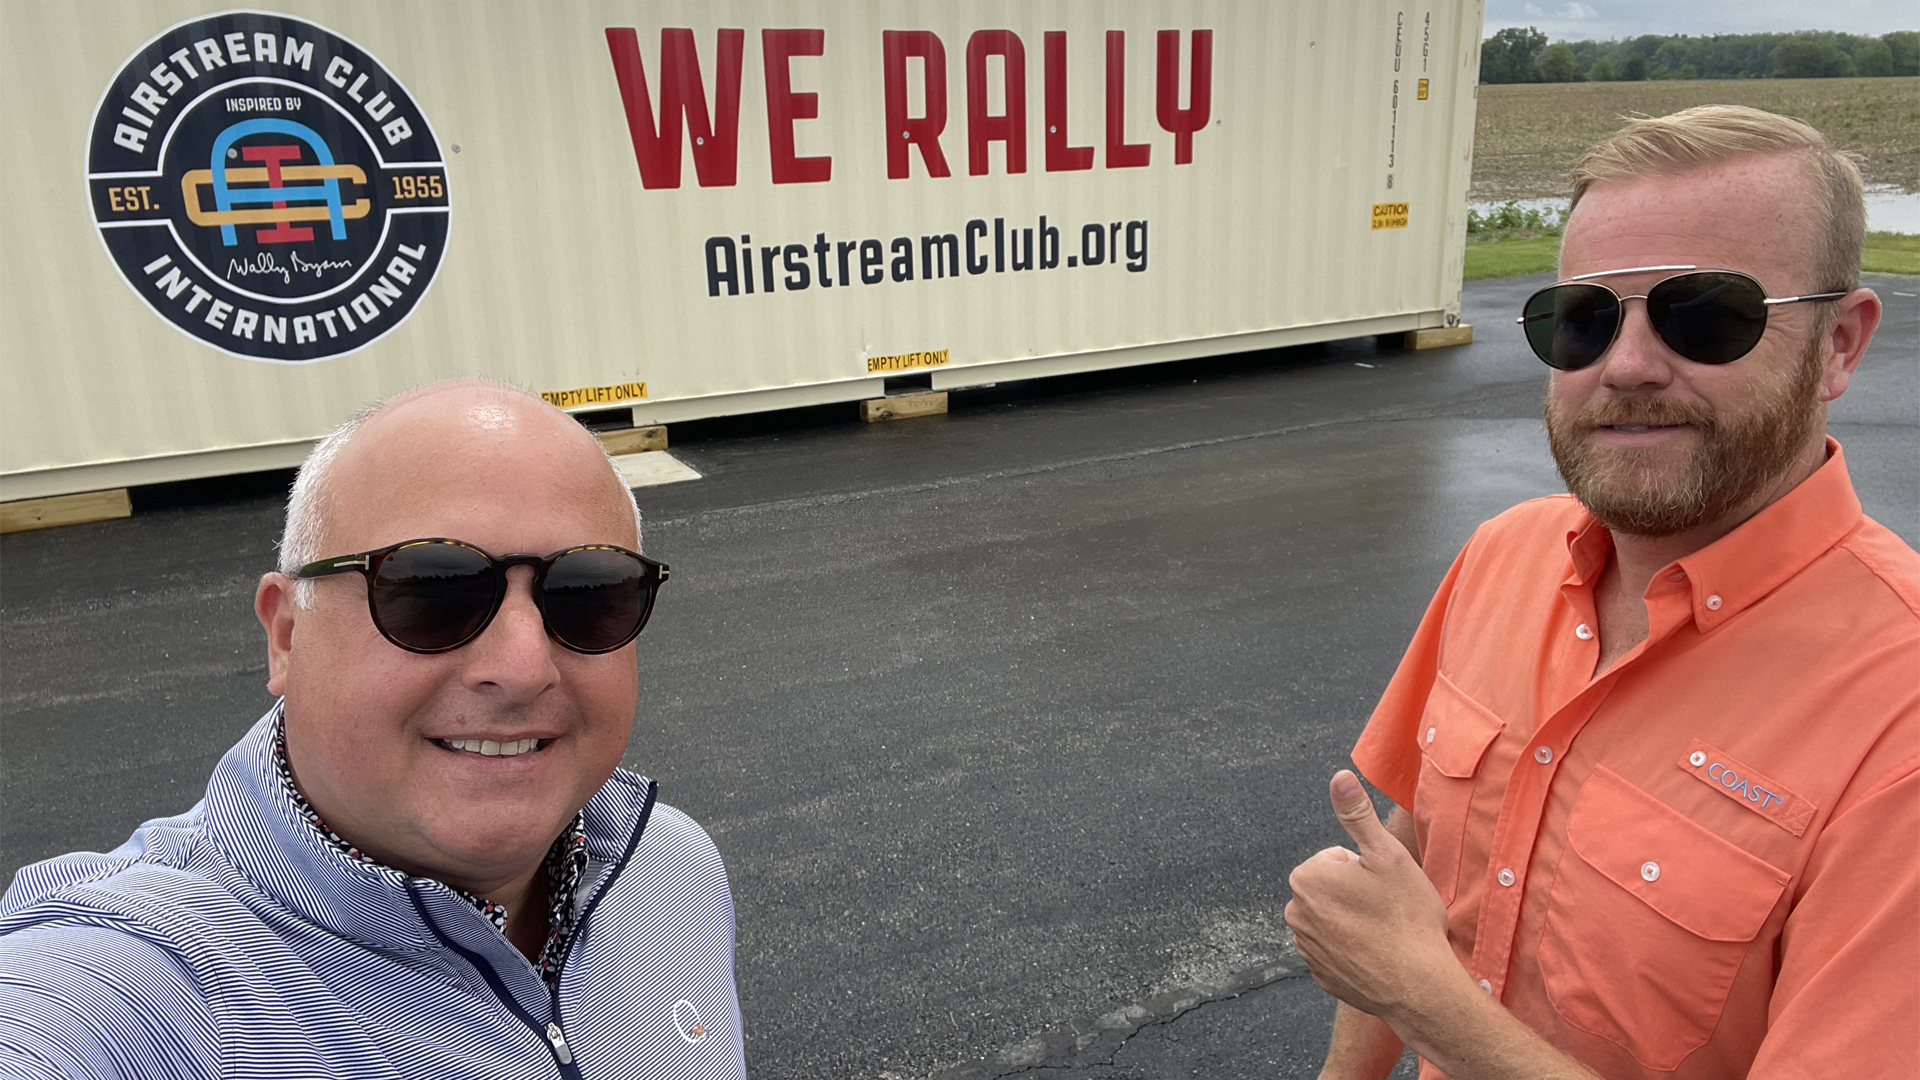 Bob Hoffman and his partner at the Airstream Club headquarters in Jackson Center, Ohio